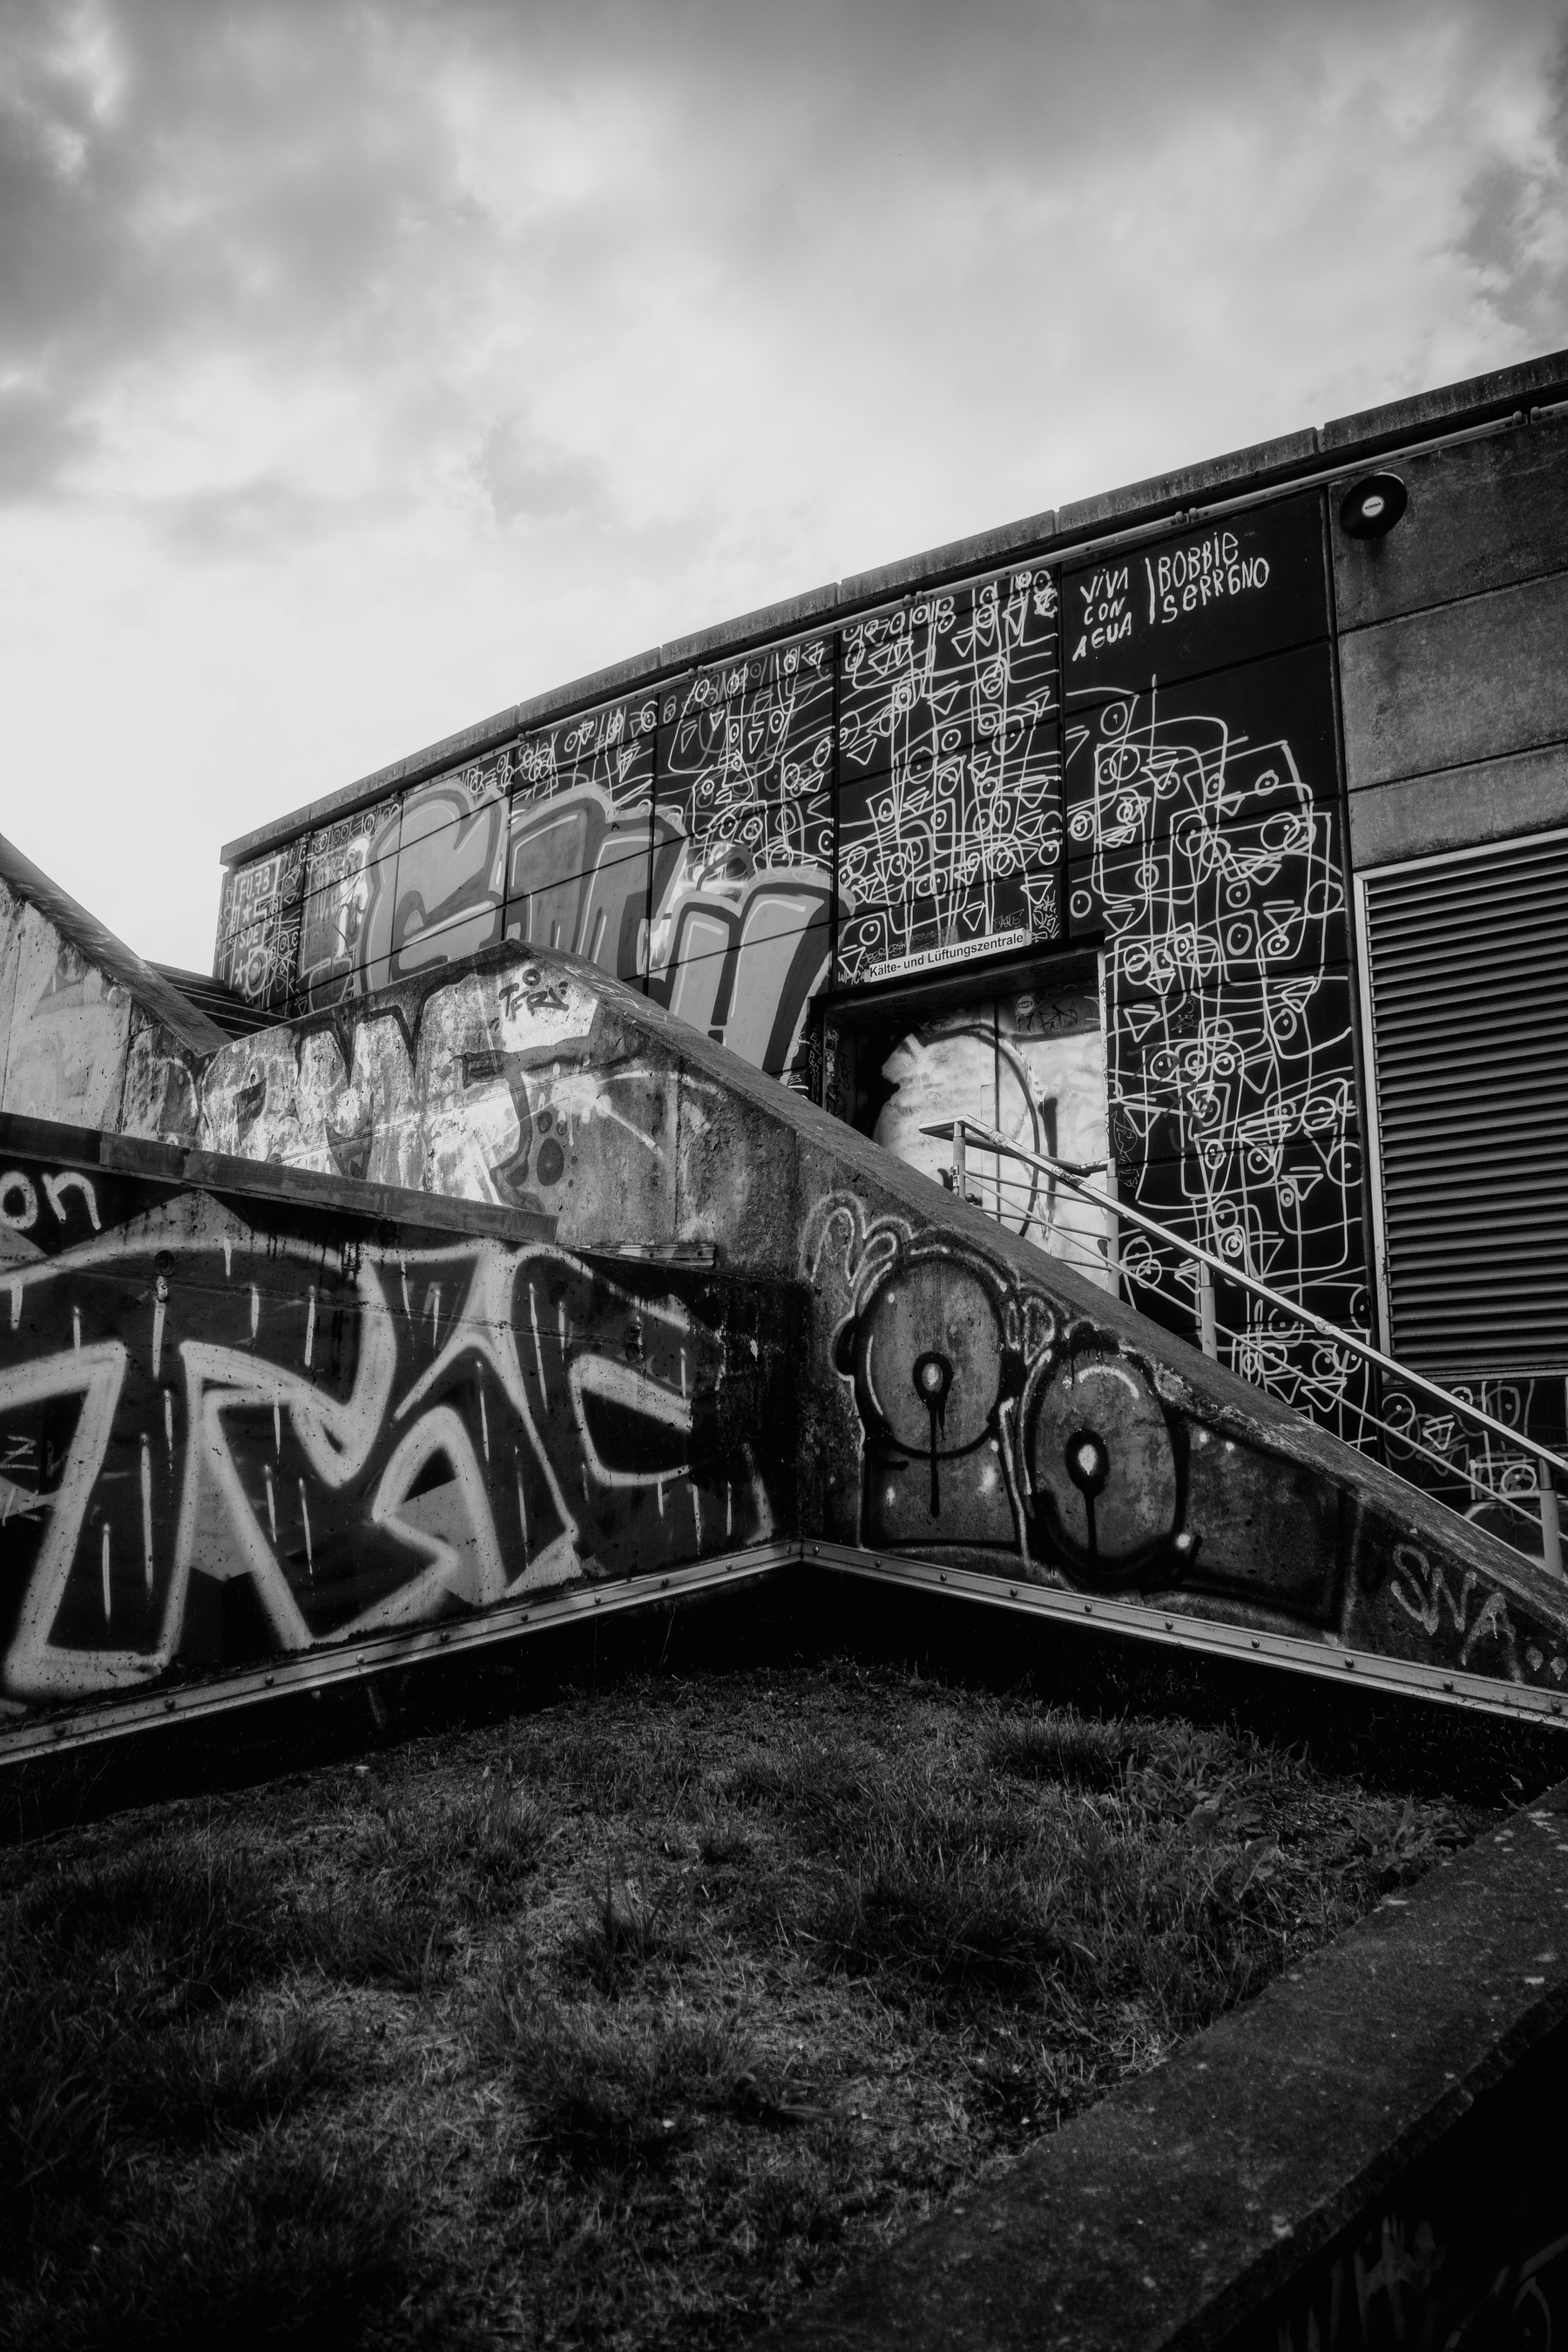 The black and white photo depicts a concrete building and stairway covered in various graffiti and street art, set against a cloudy sky.